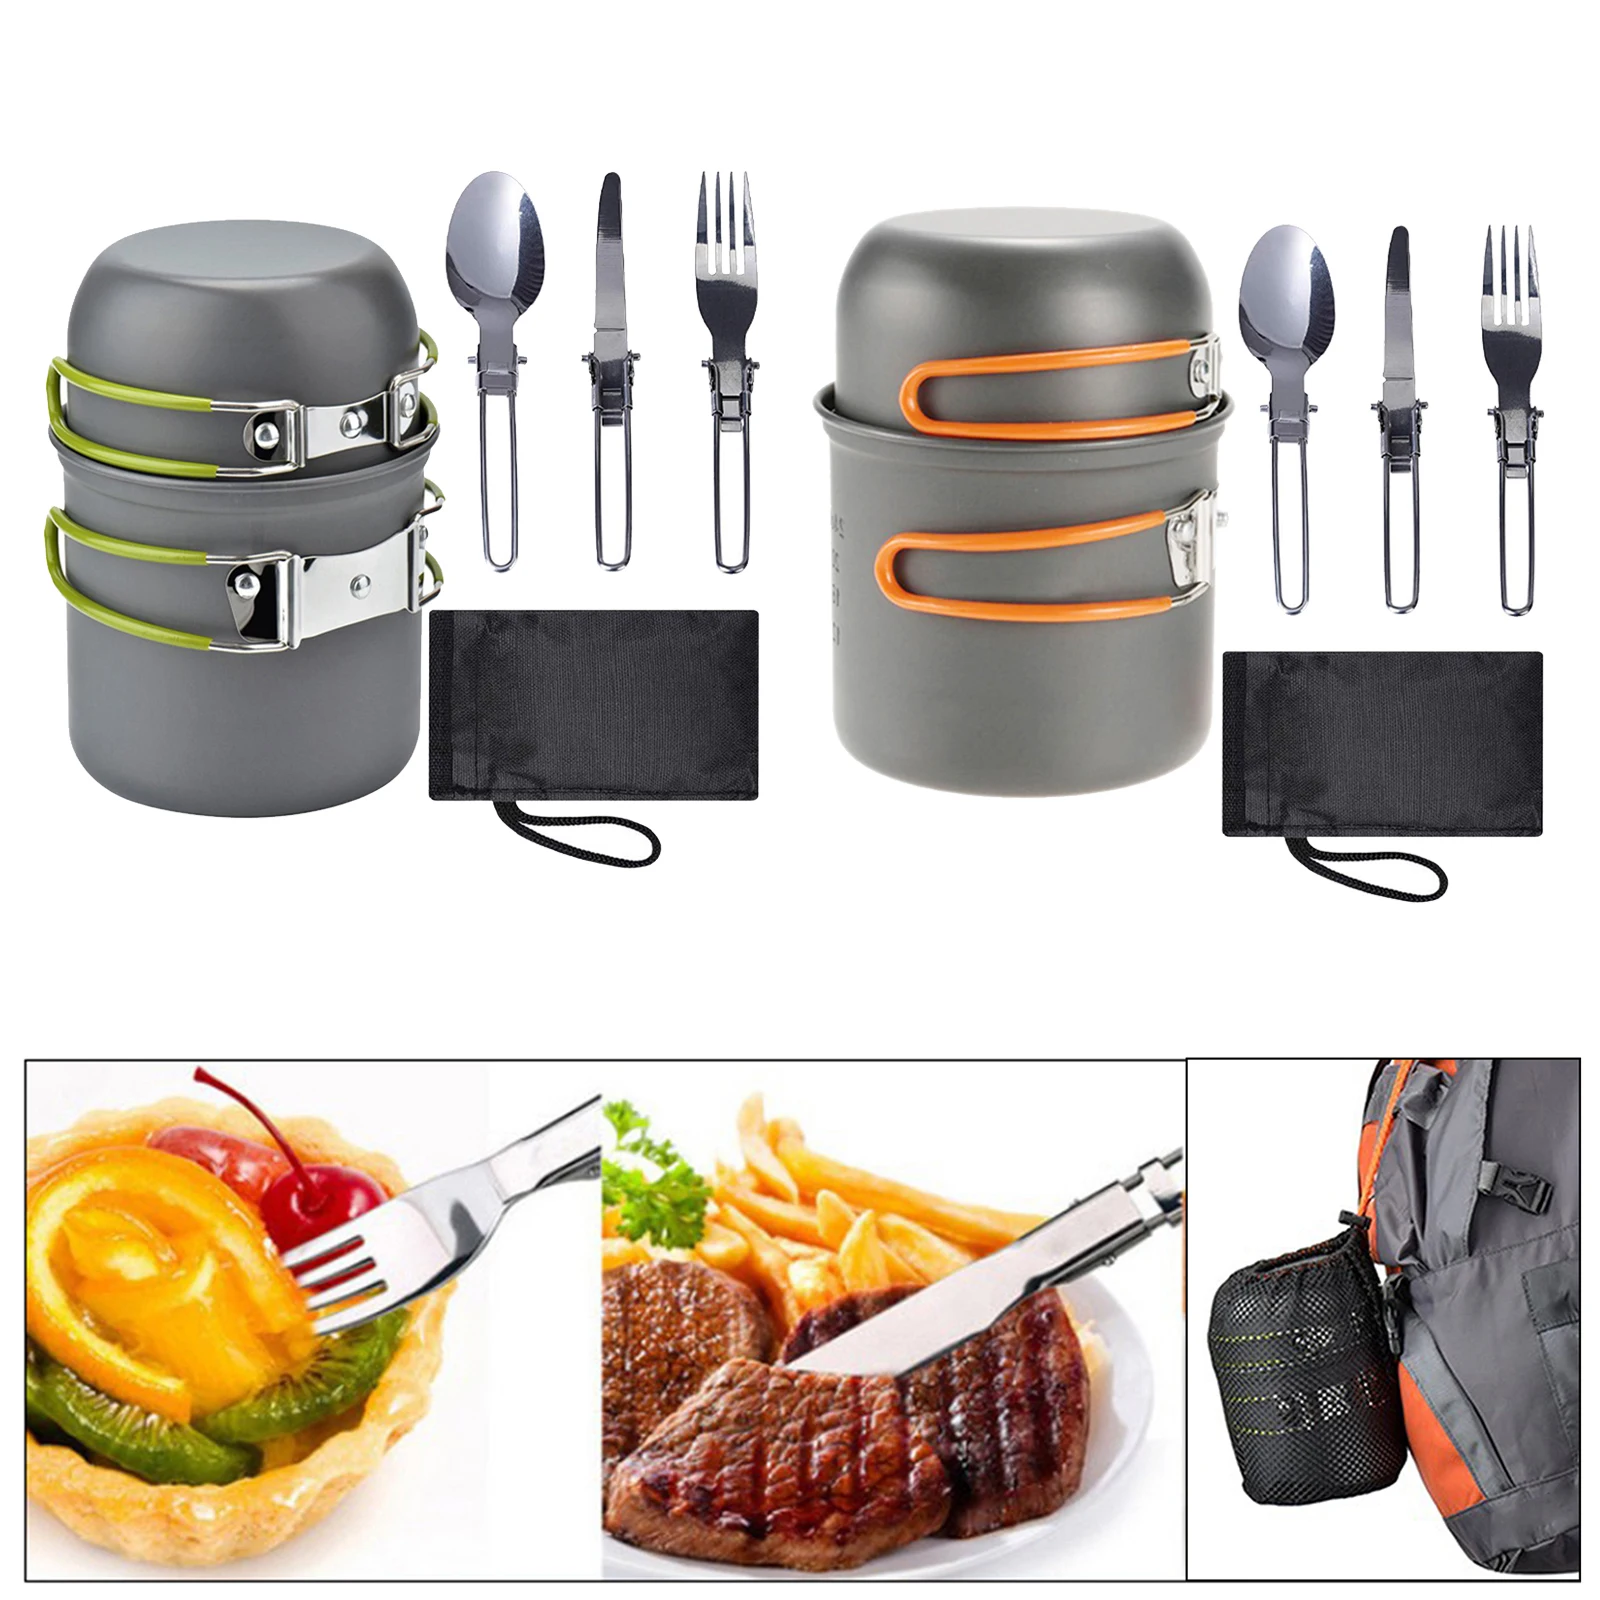 Camping Cookware Picnic Mess Kit Outdoor Pan Cup Knife Cooker W/ Carry Bag